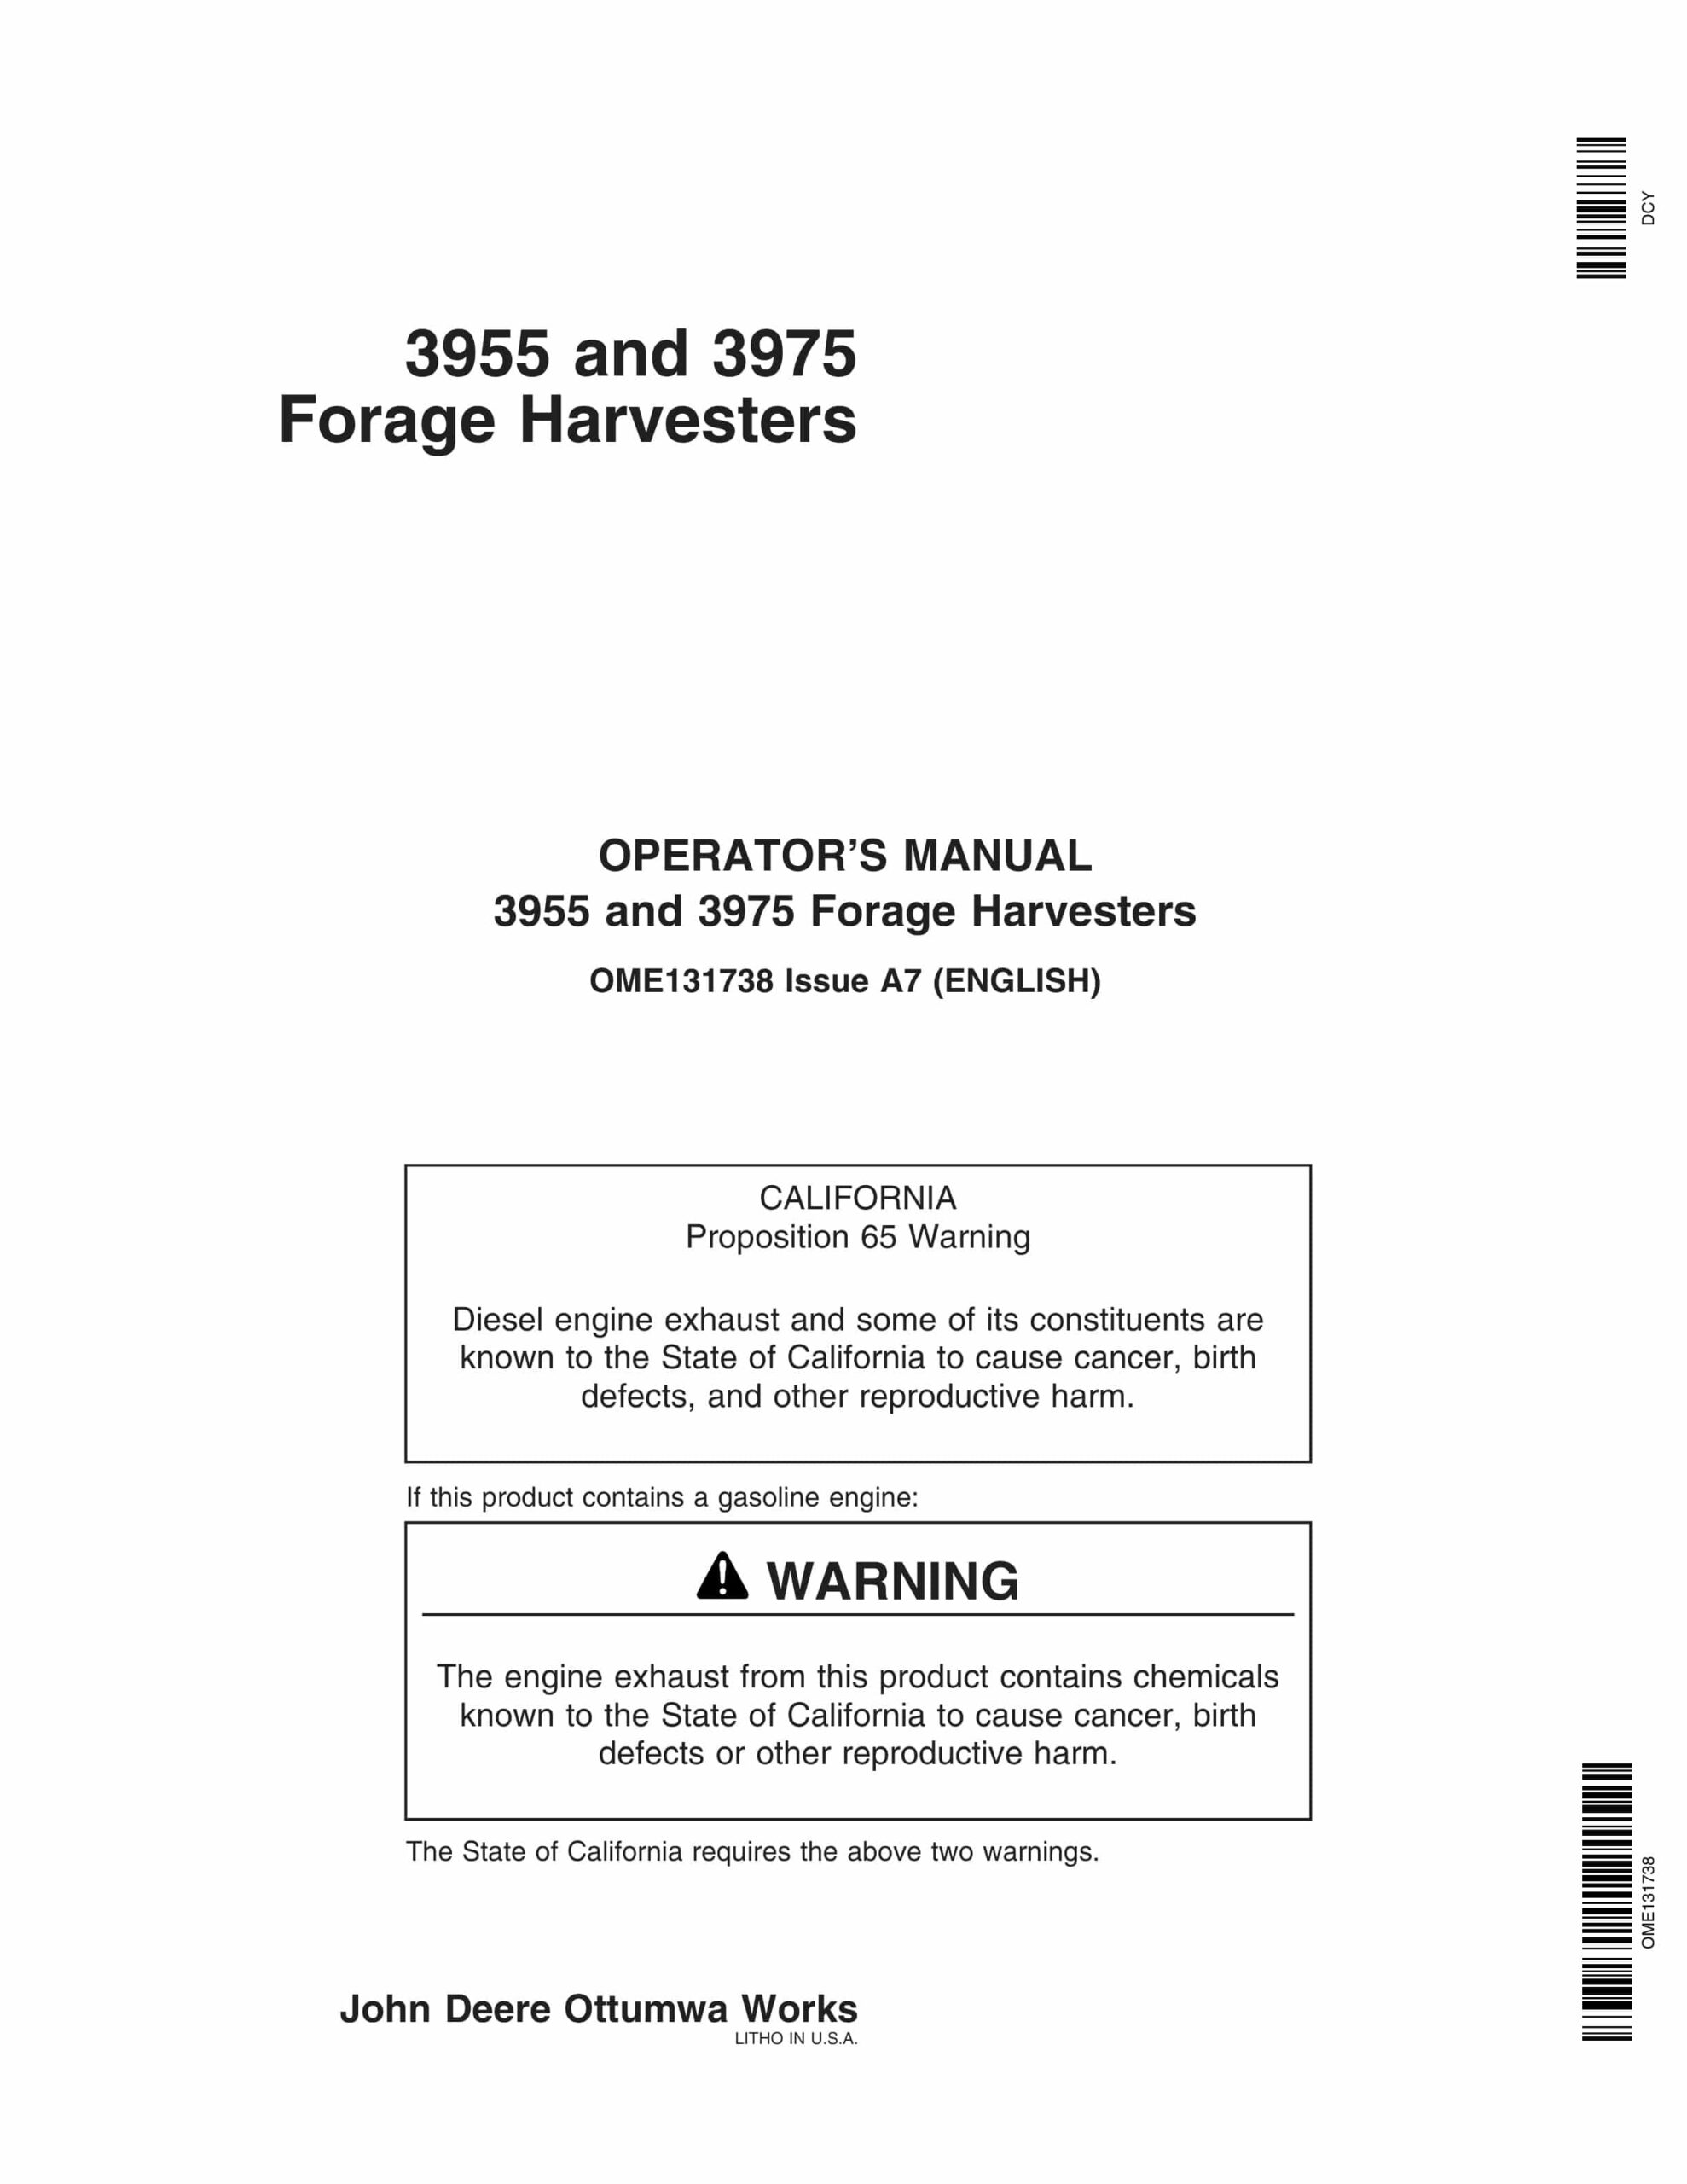 John Deere 3955 and 3975 Forage Harvesters Operator Manual OME131738-1